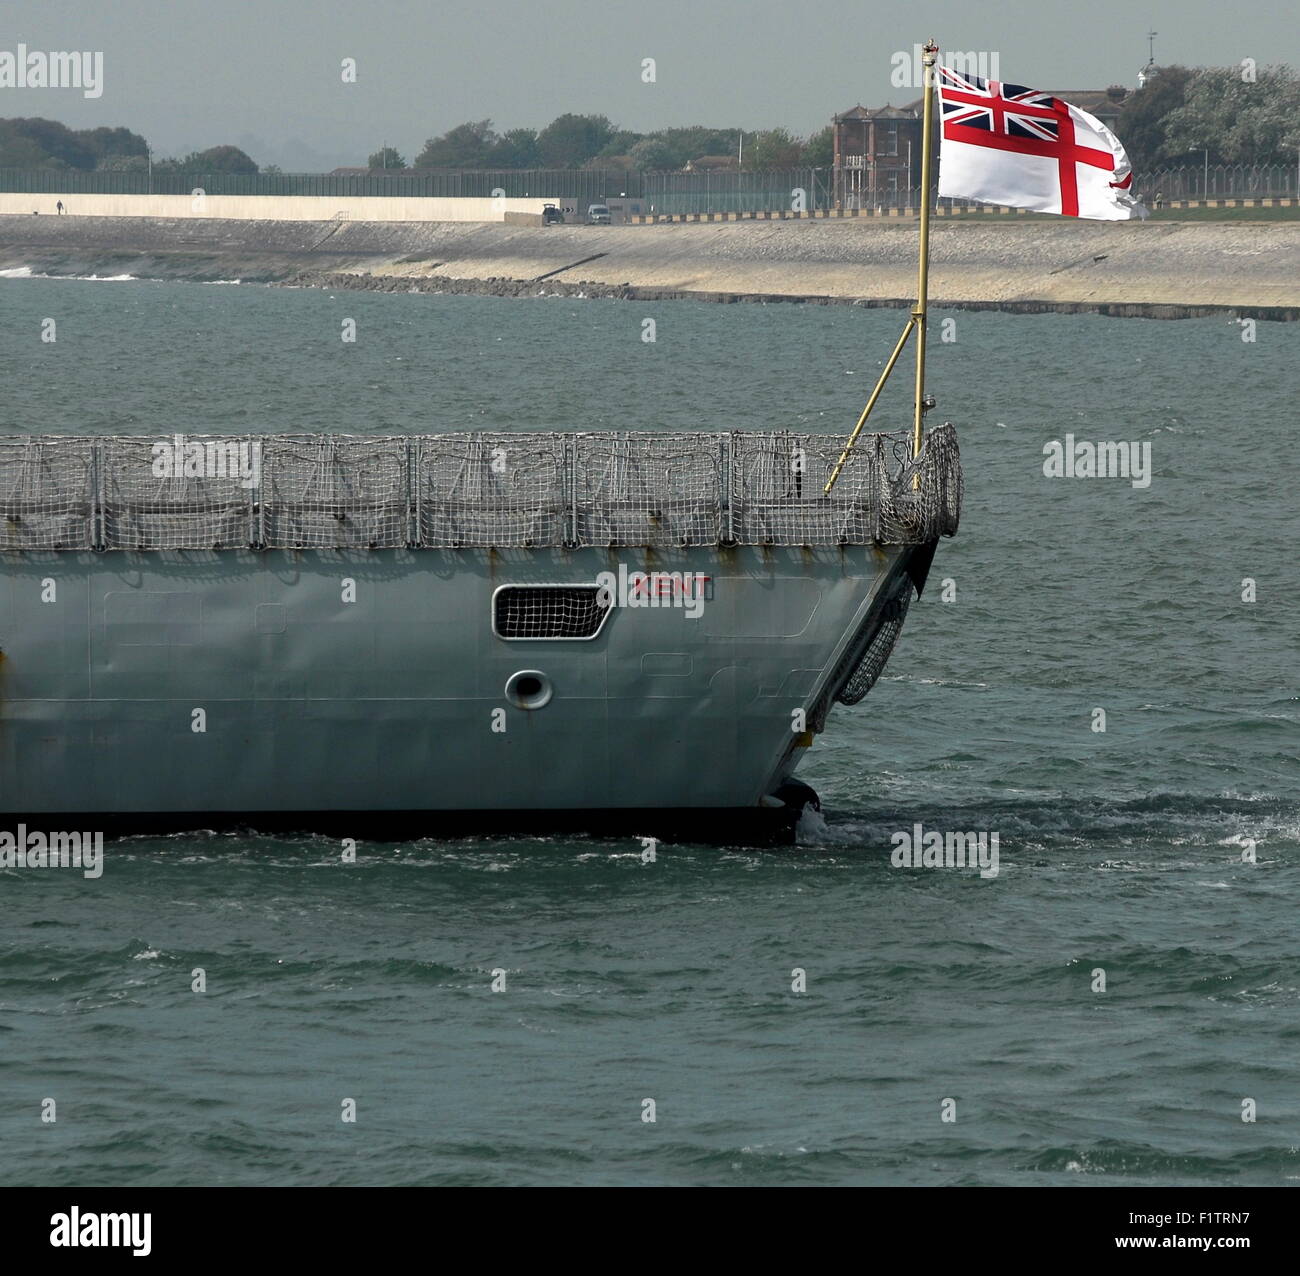 AJAXNETPHOTO. - 5th MAY, 2014. PORTSMOUTH,ENGLAND. - FRIGATE LEAVES . - HMS KENT LEAVING PNB FLYING WHITE ENSIGN. PHOTO:TONY HOLLAND/AJAX REF:DTH140505 8578 Stock Photo